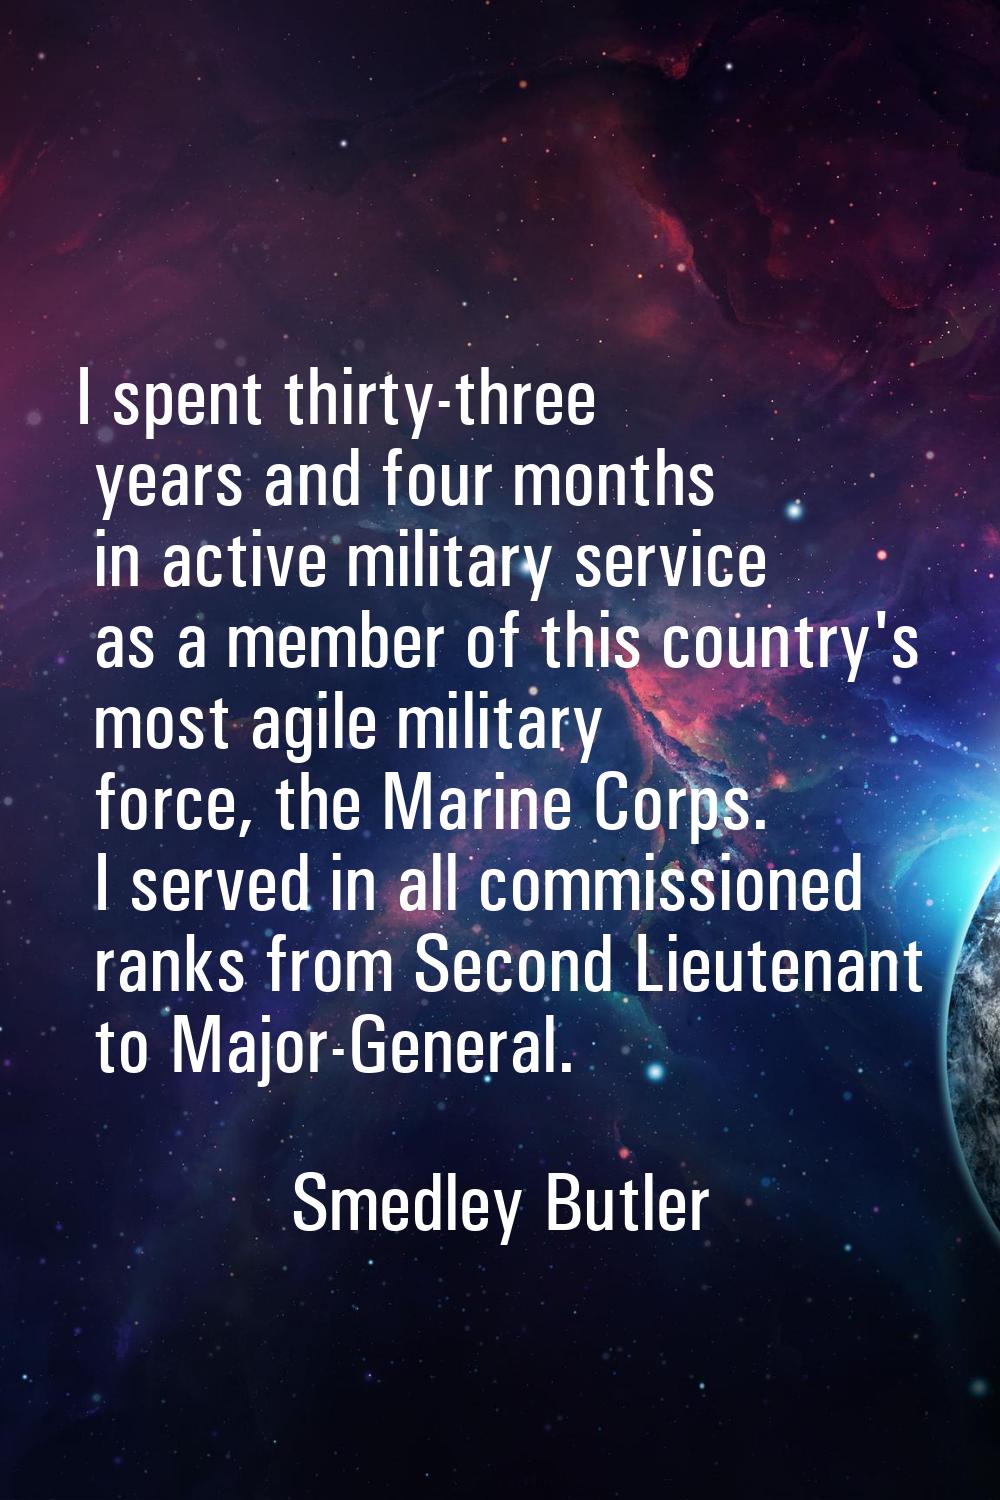 I spent thirty-three years and four months in active military service as a member of this country's